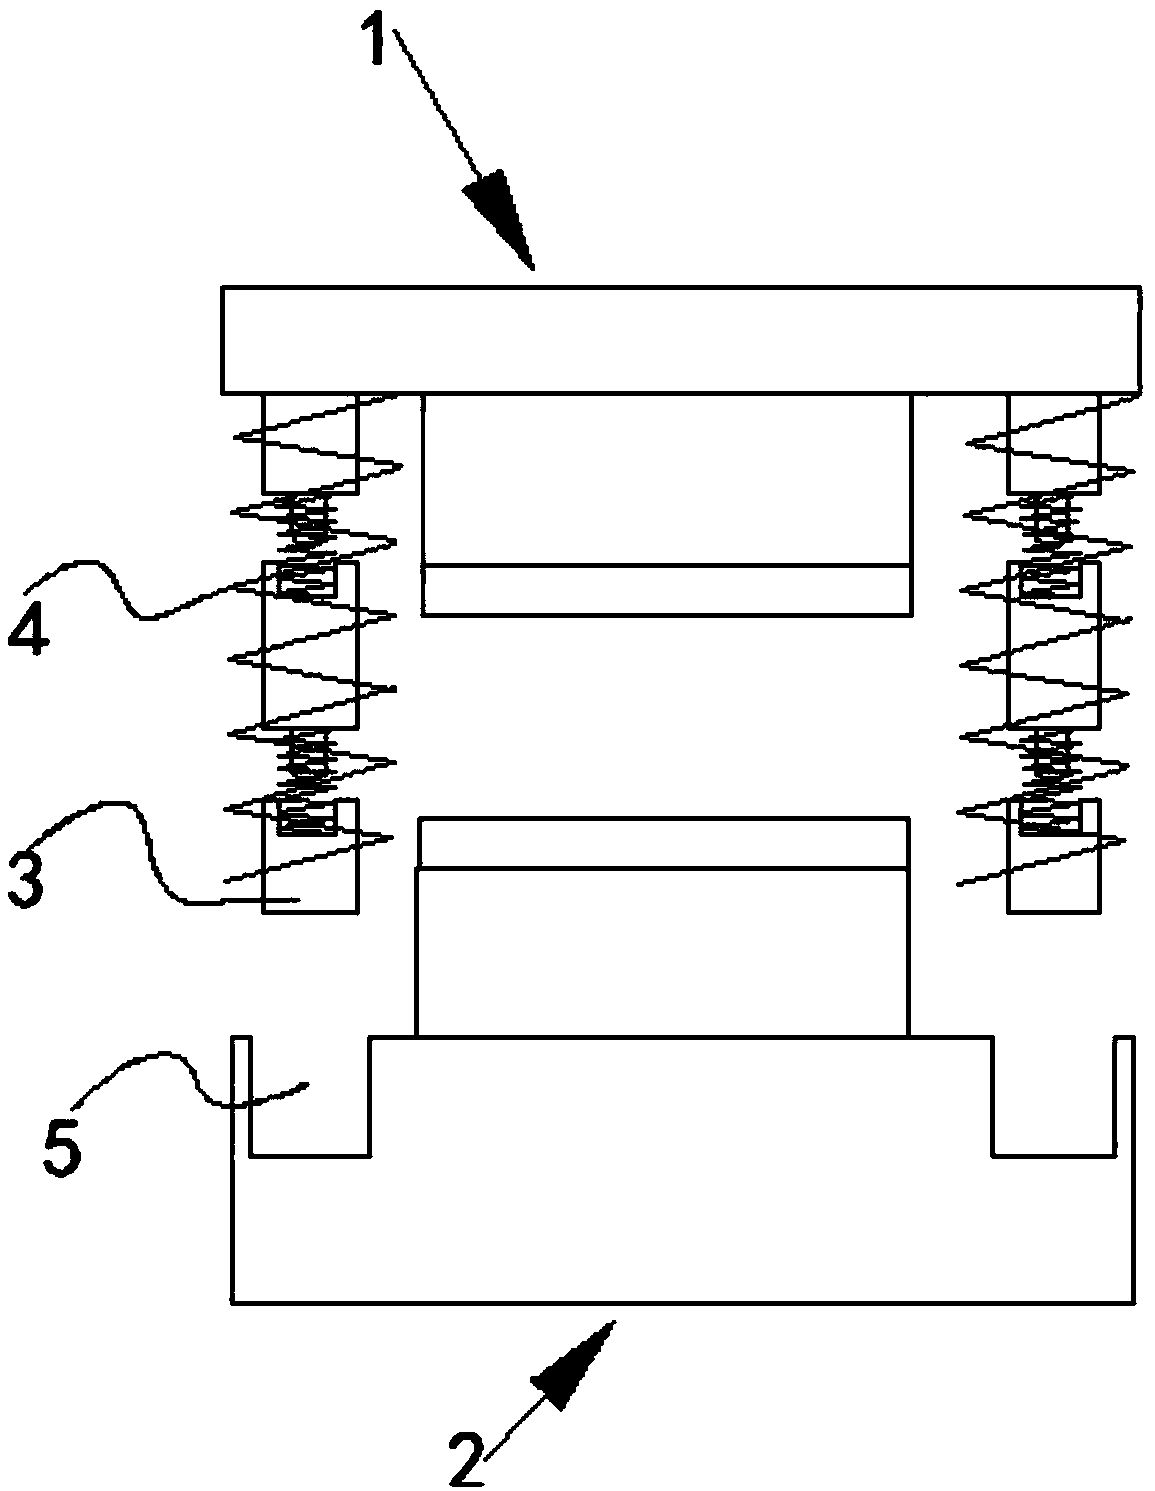 Buffering structure of precise punching die